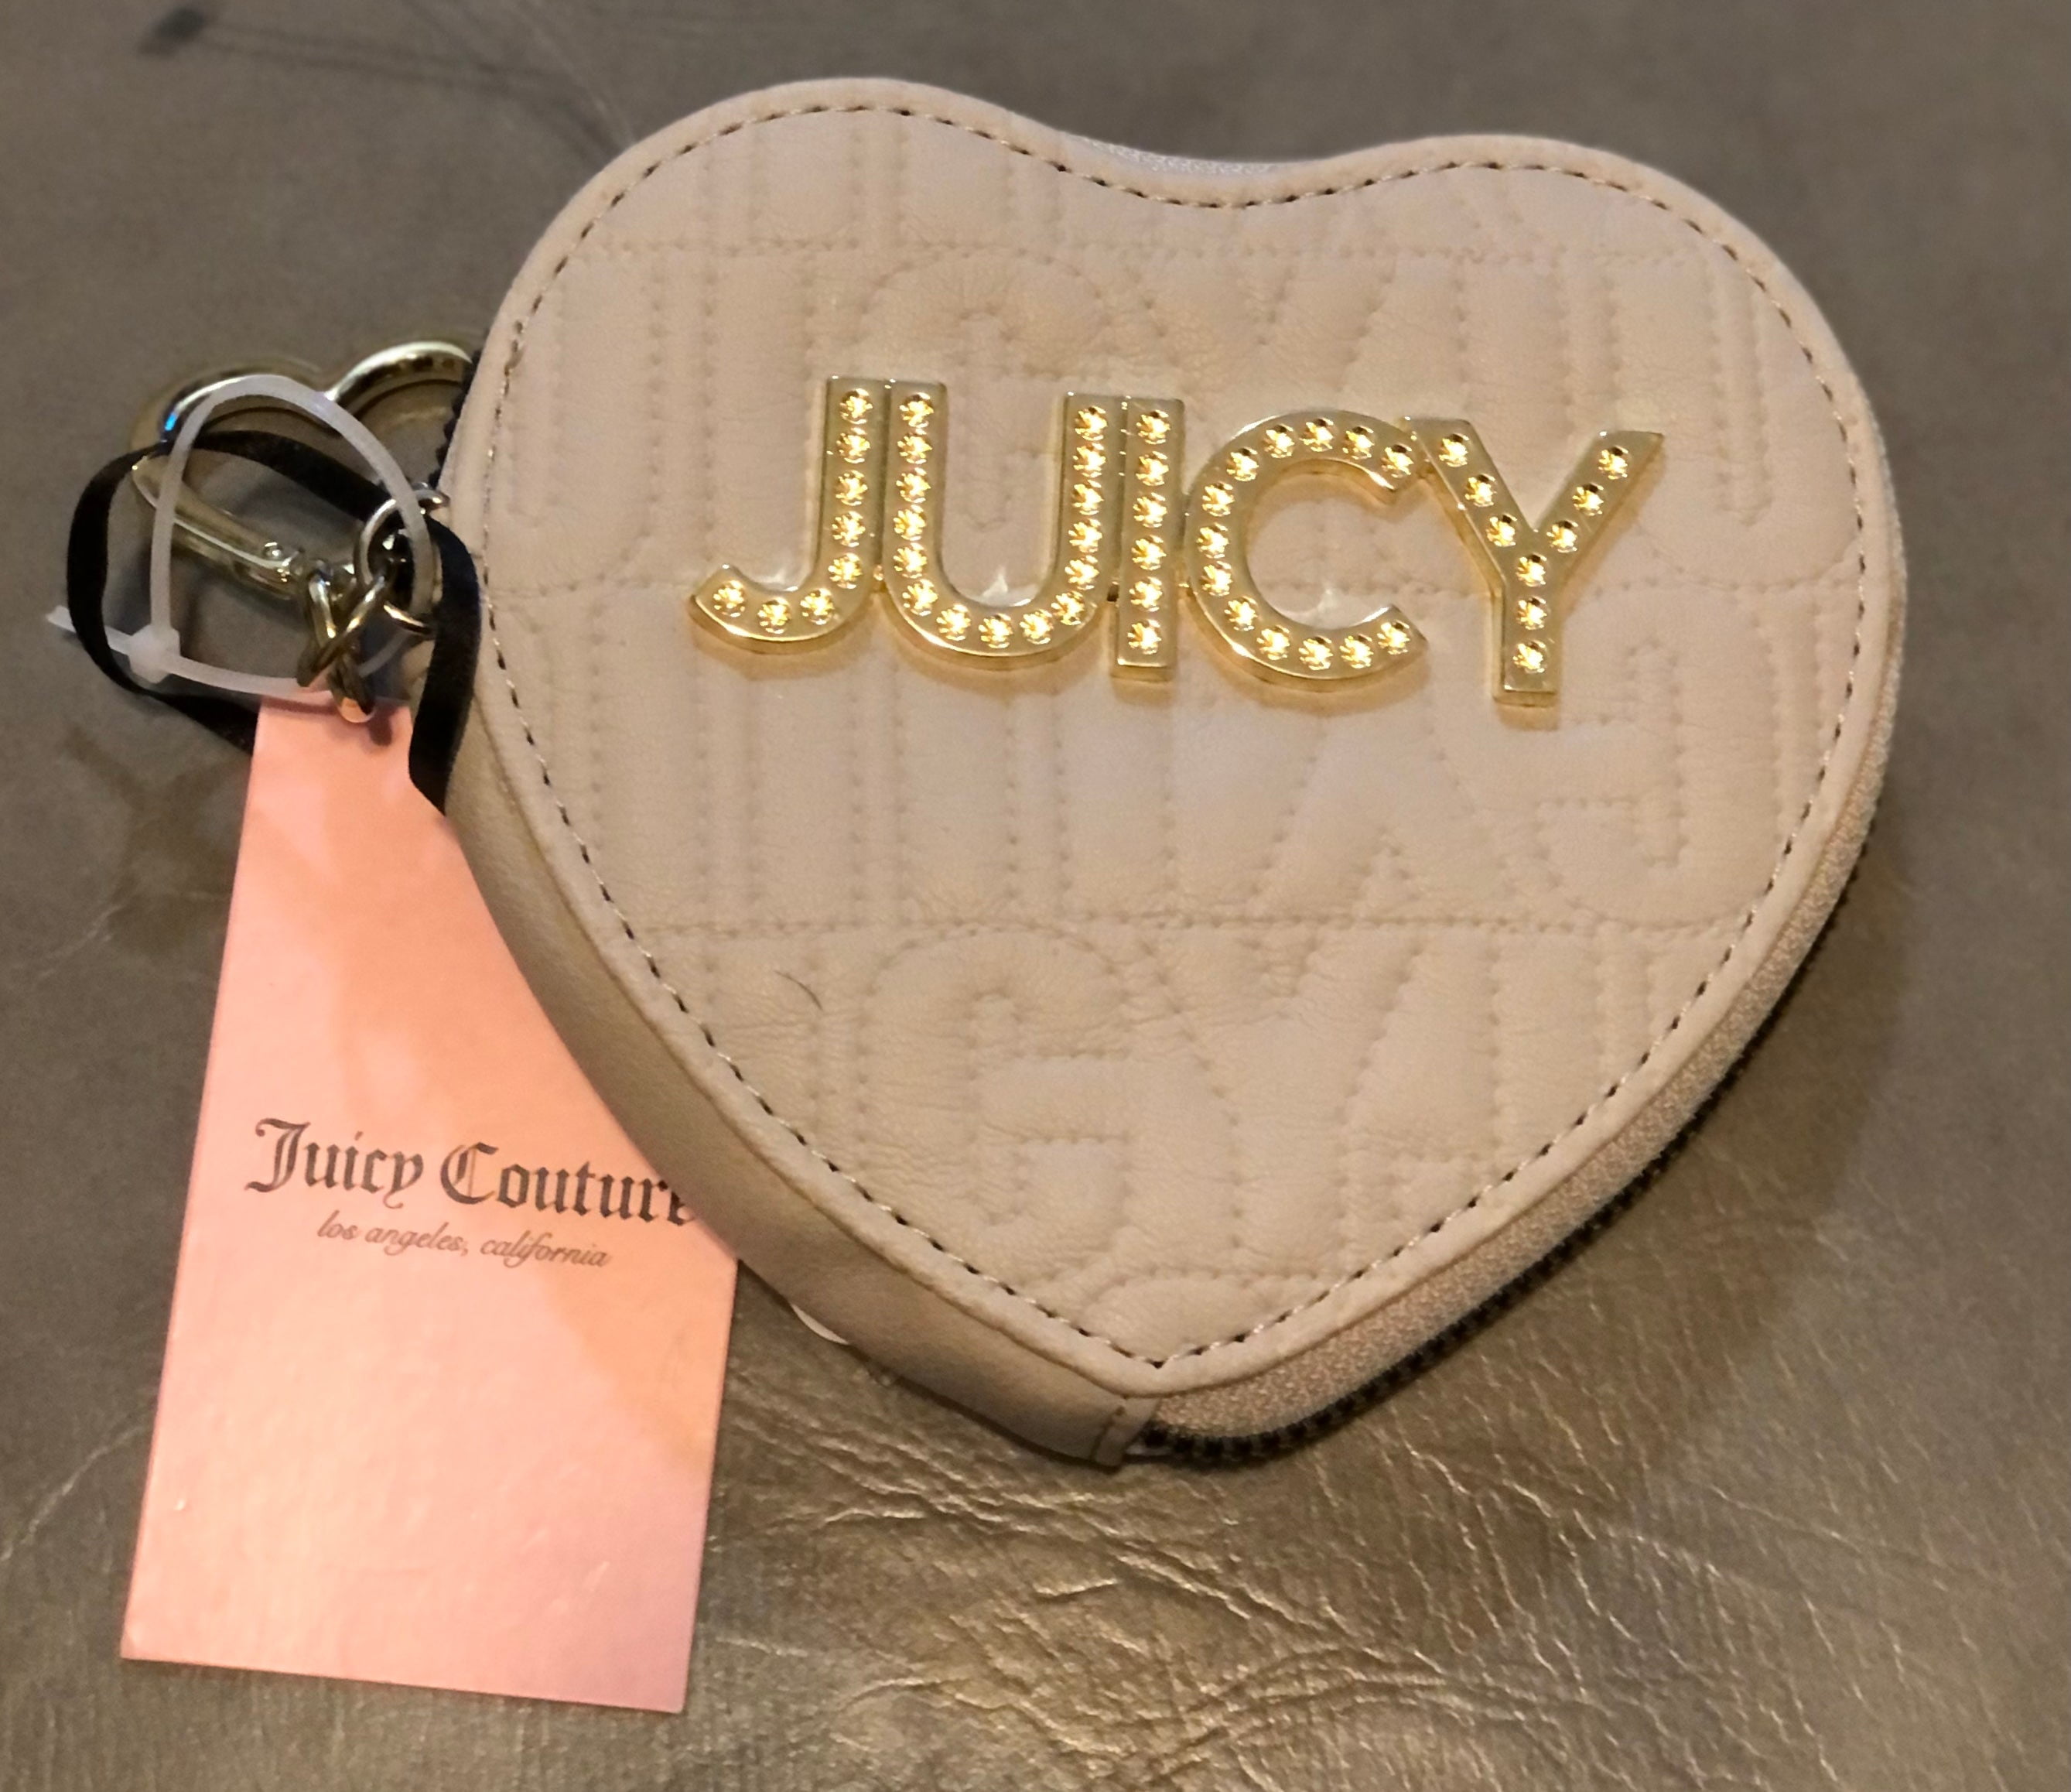 Juicy Couture | Bags | Juicy Couture Heart Shaped Coin Purse | Poshmark